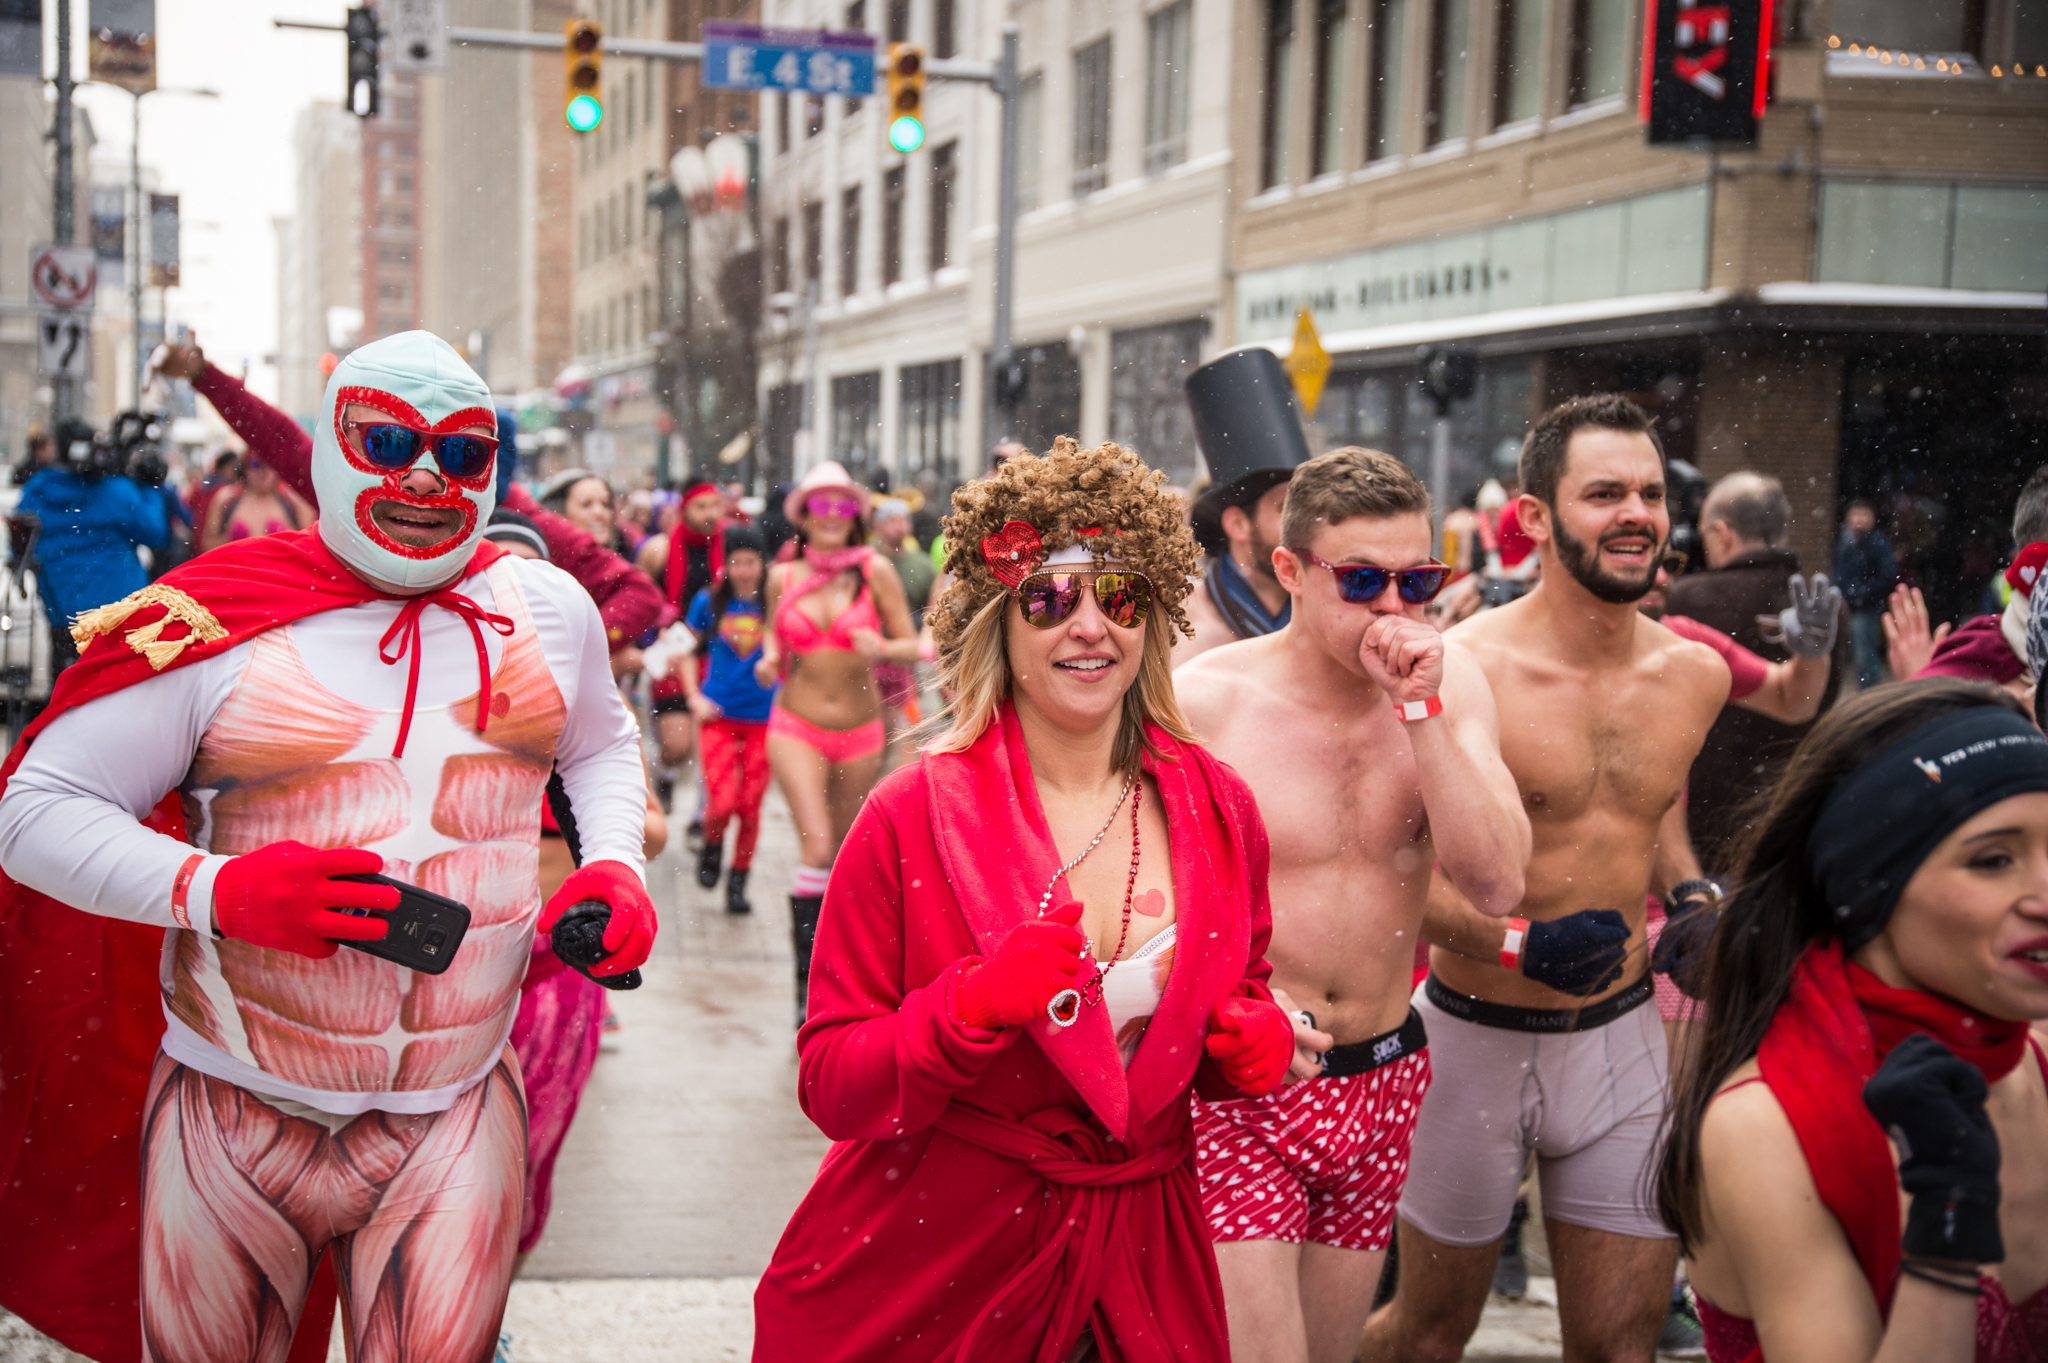 10 Things You Need to Know About Cupid's Undie Run - Cupid's Undie Run